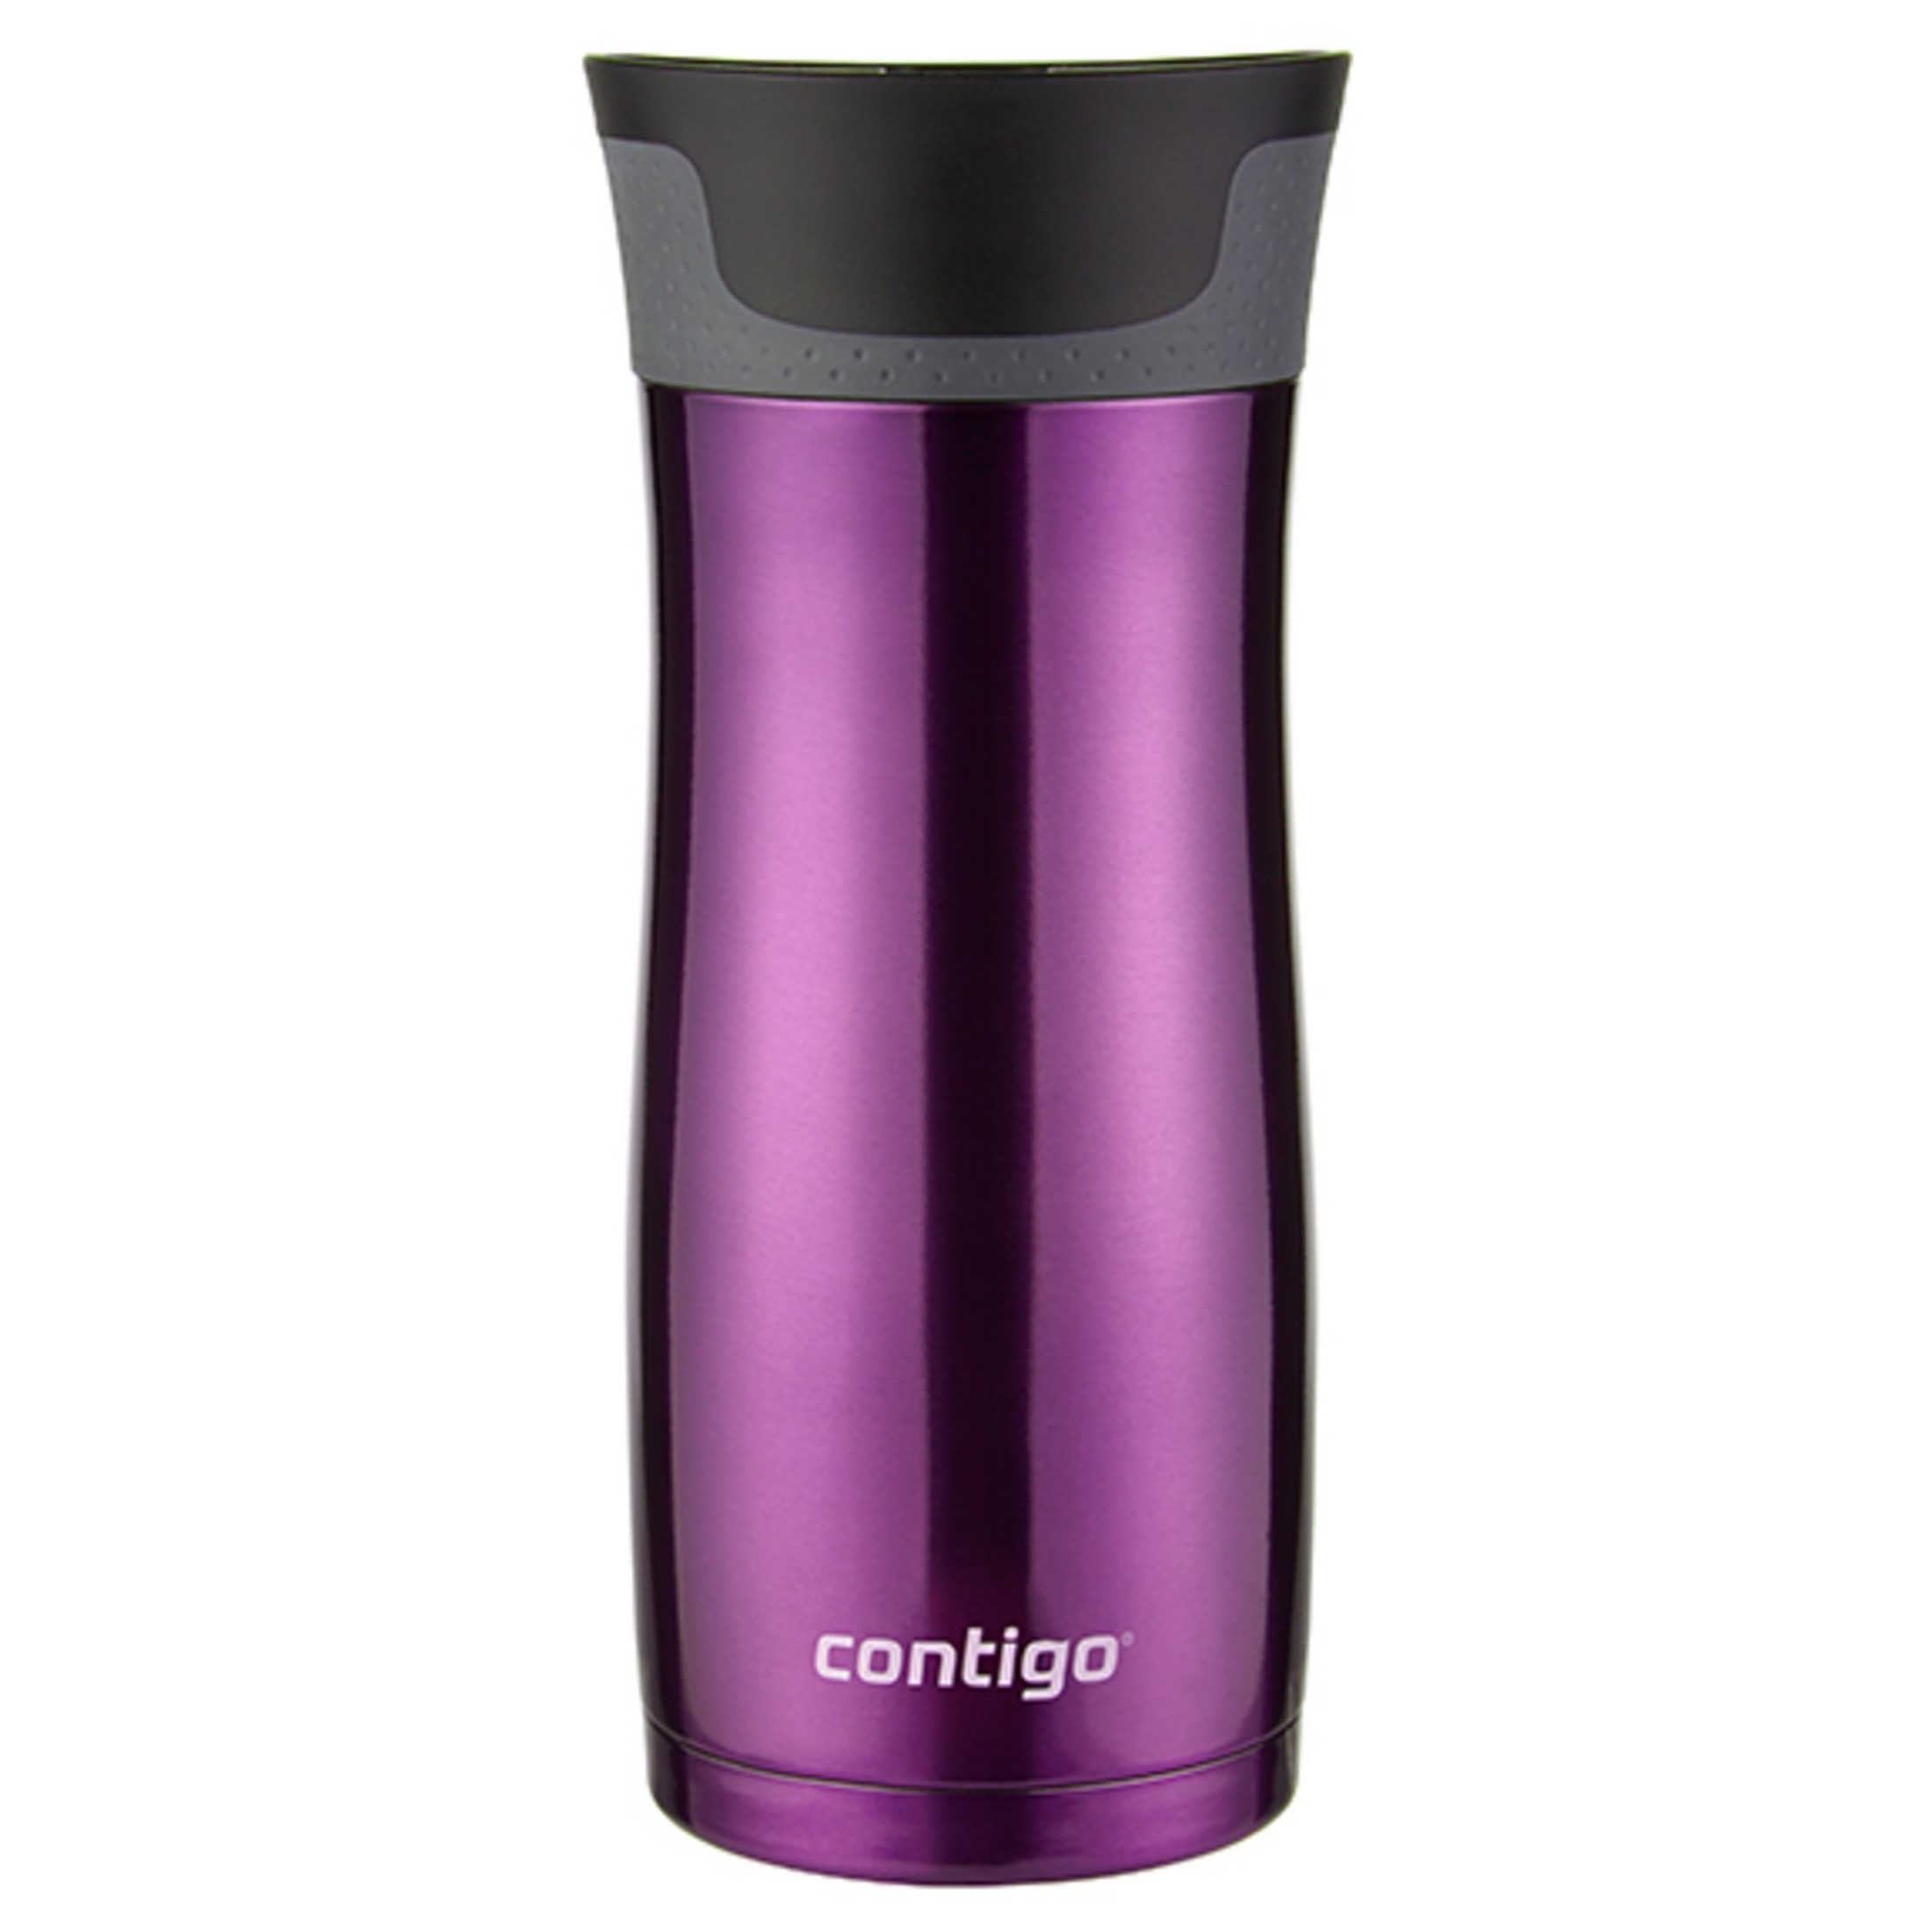 Contigo West Loop Stainless Steel Travel Mug with AUTOSEAL Lid Radiant Orchid, 16 fl oz. - image 4 of 4